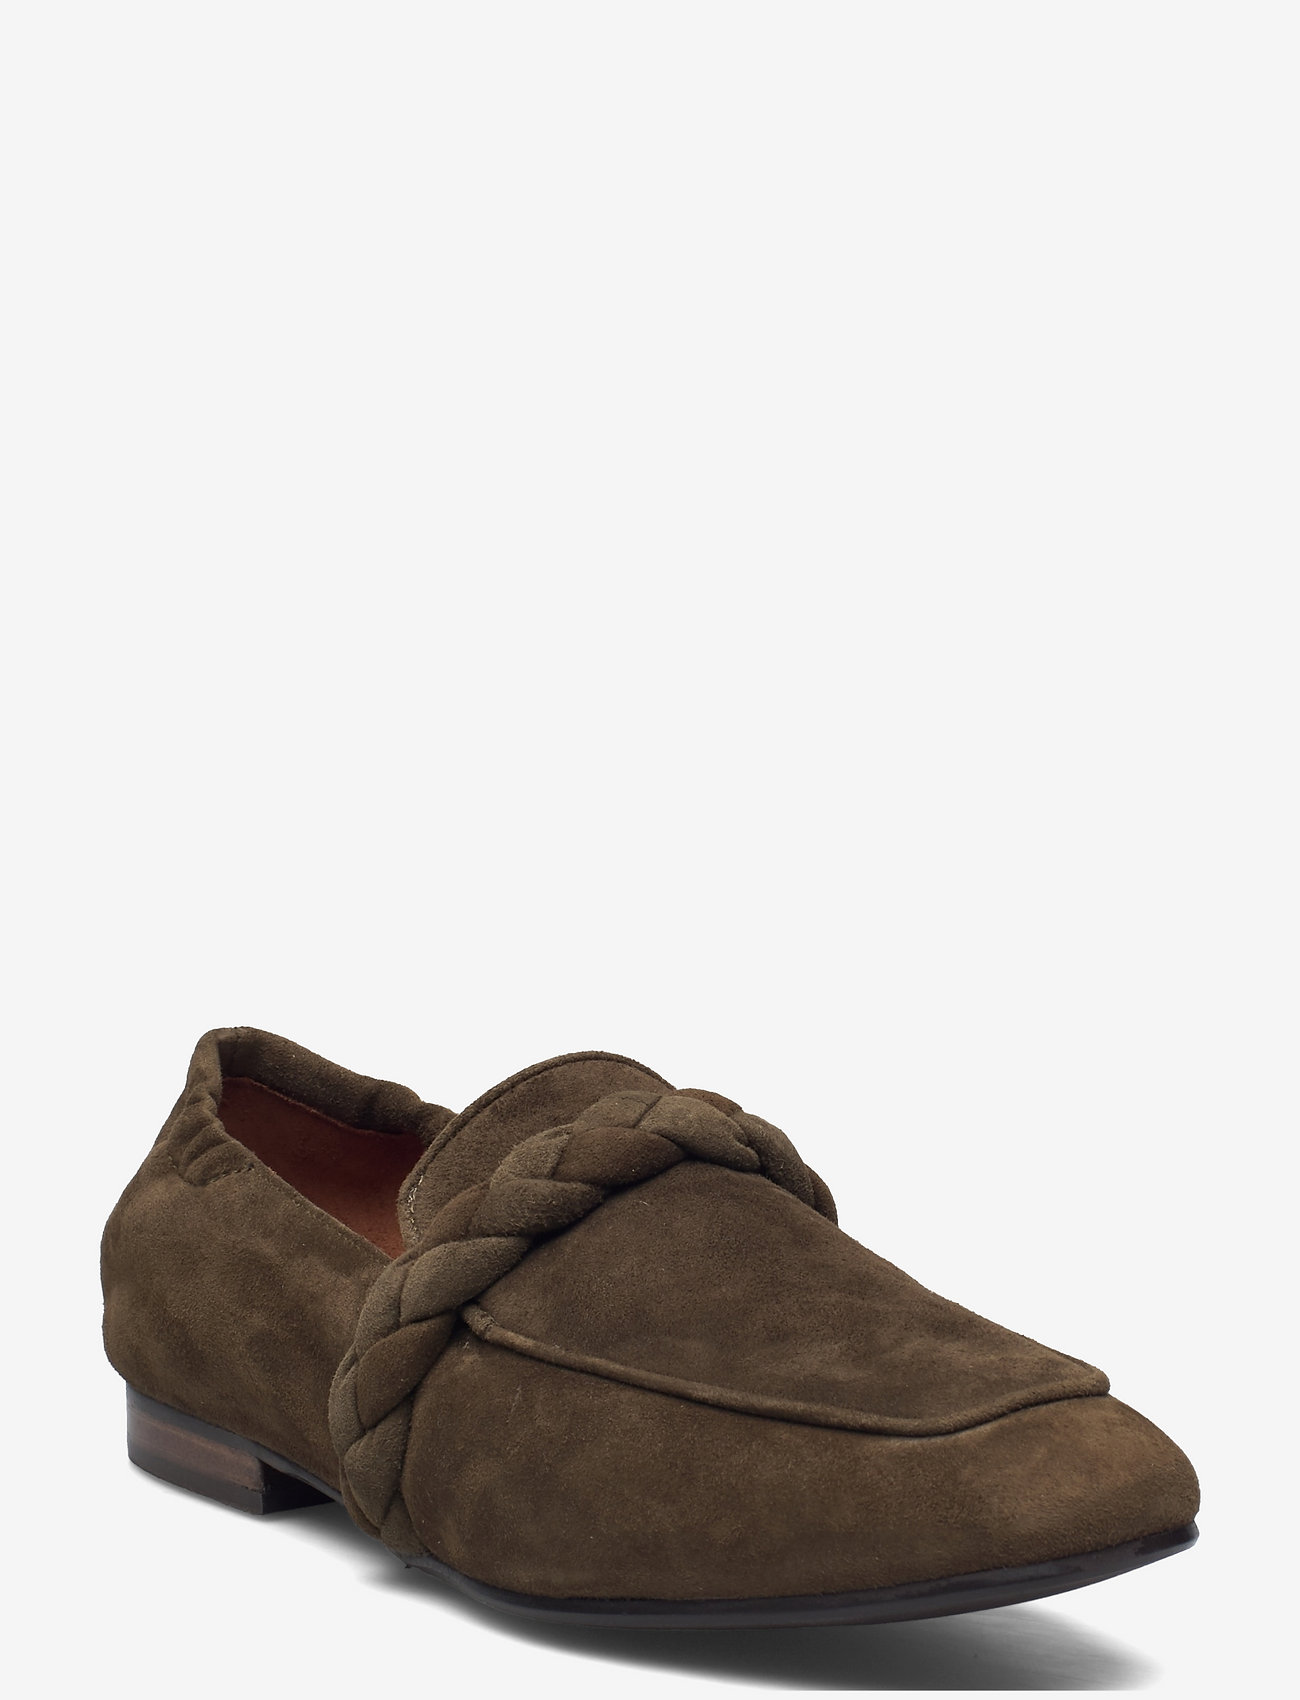 Billi Bi - Shoes A1924 - loafers - army suede 57 - 0